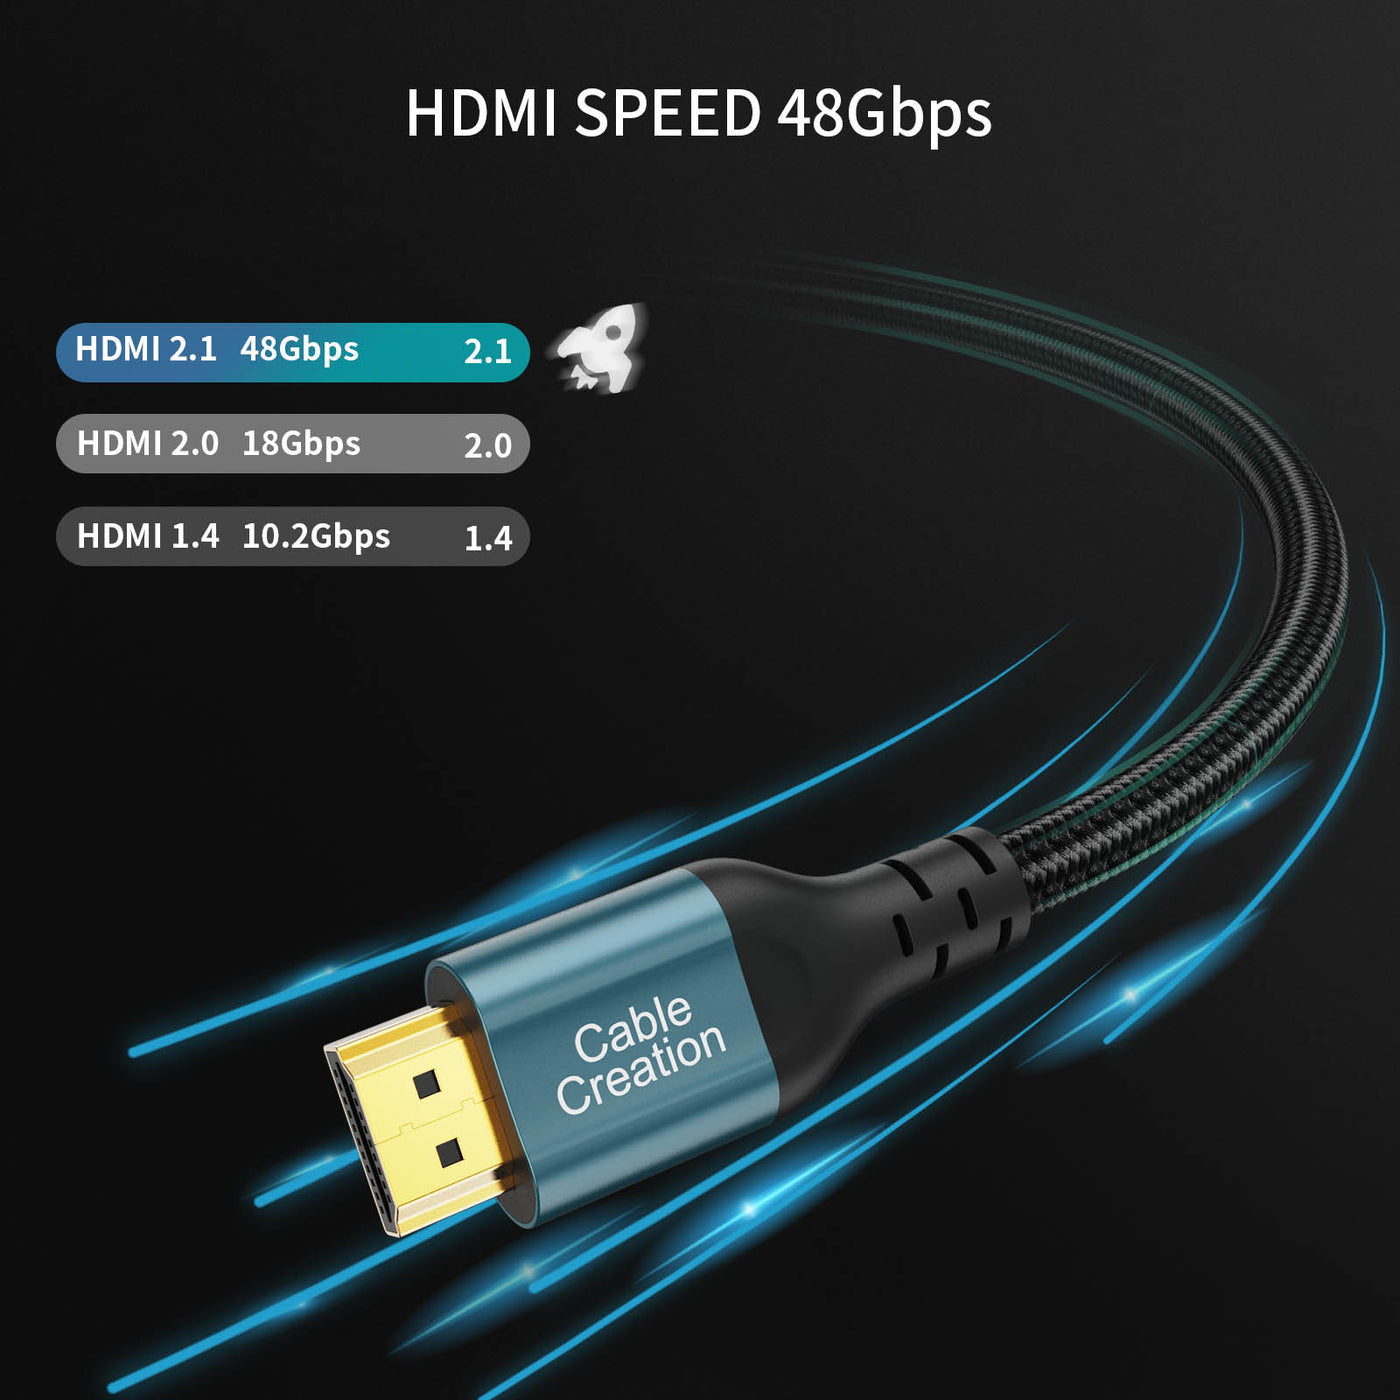 hdmi cable transfer speed